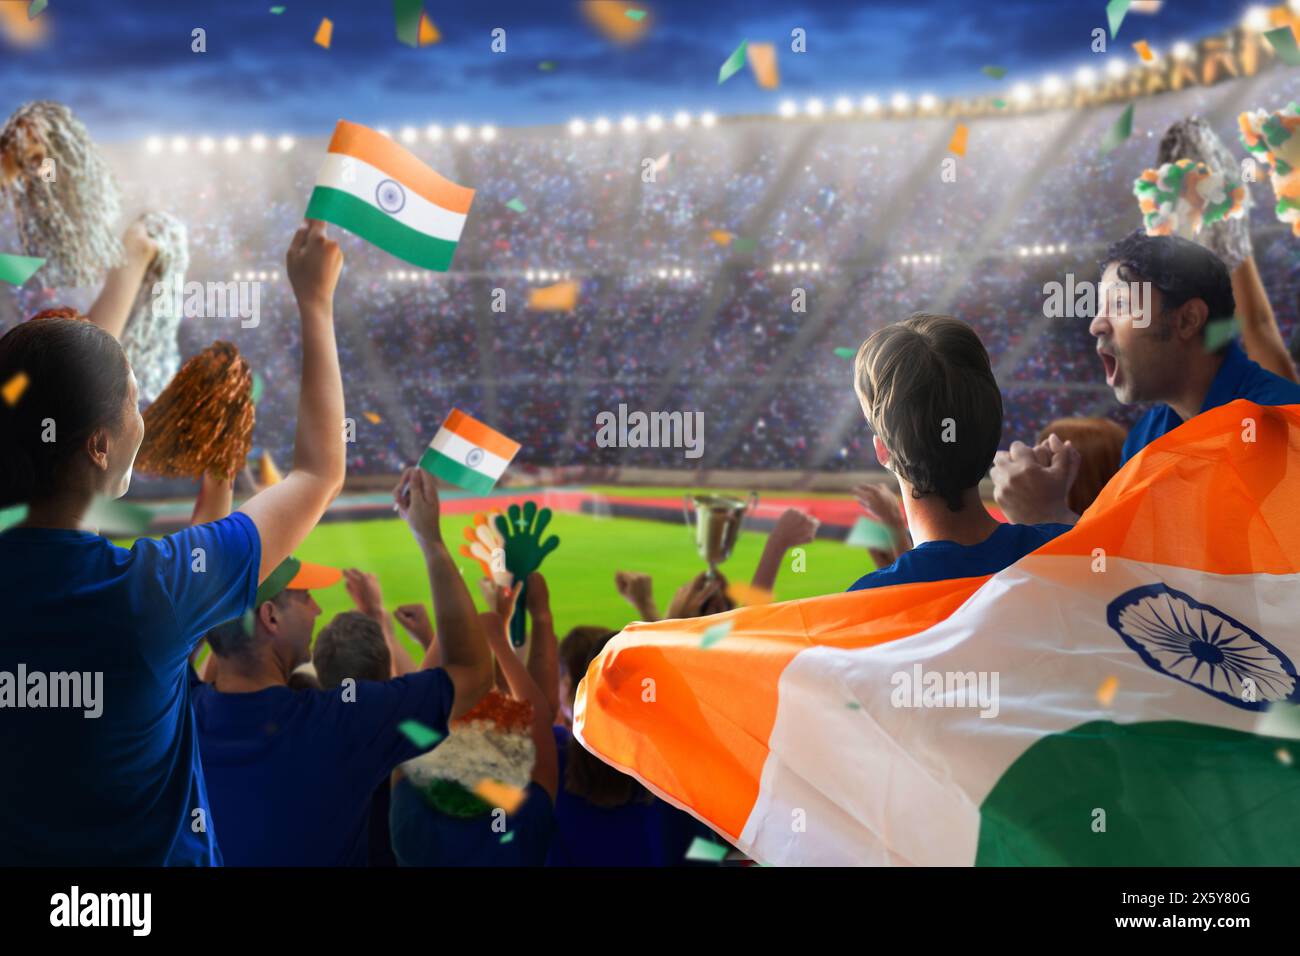 India sport supporter on stadium. Indian fans on cricket, rugby or football pitch watching team play. Group of supporters with flag Stock Photo